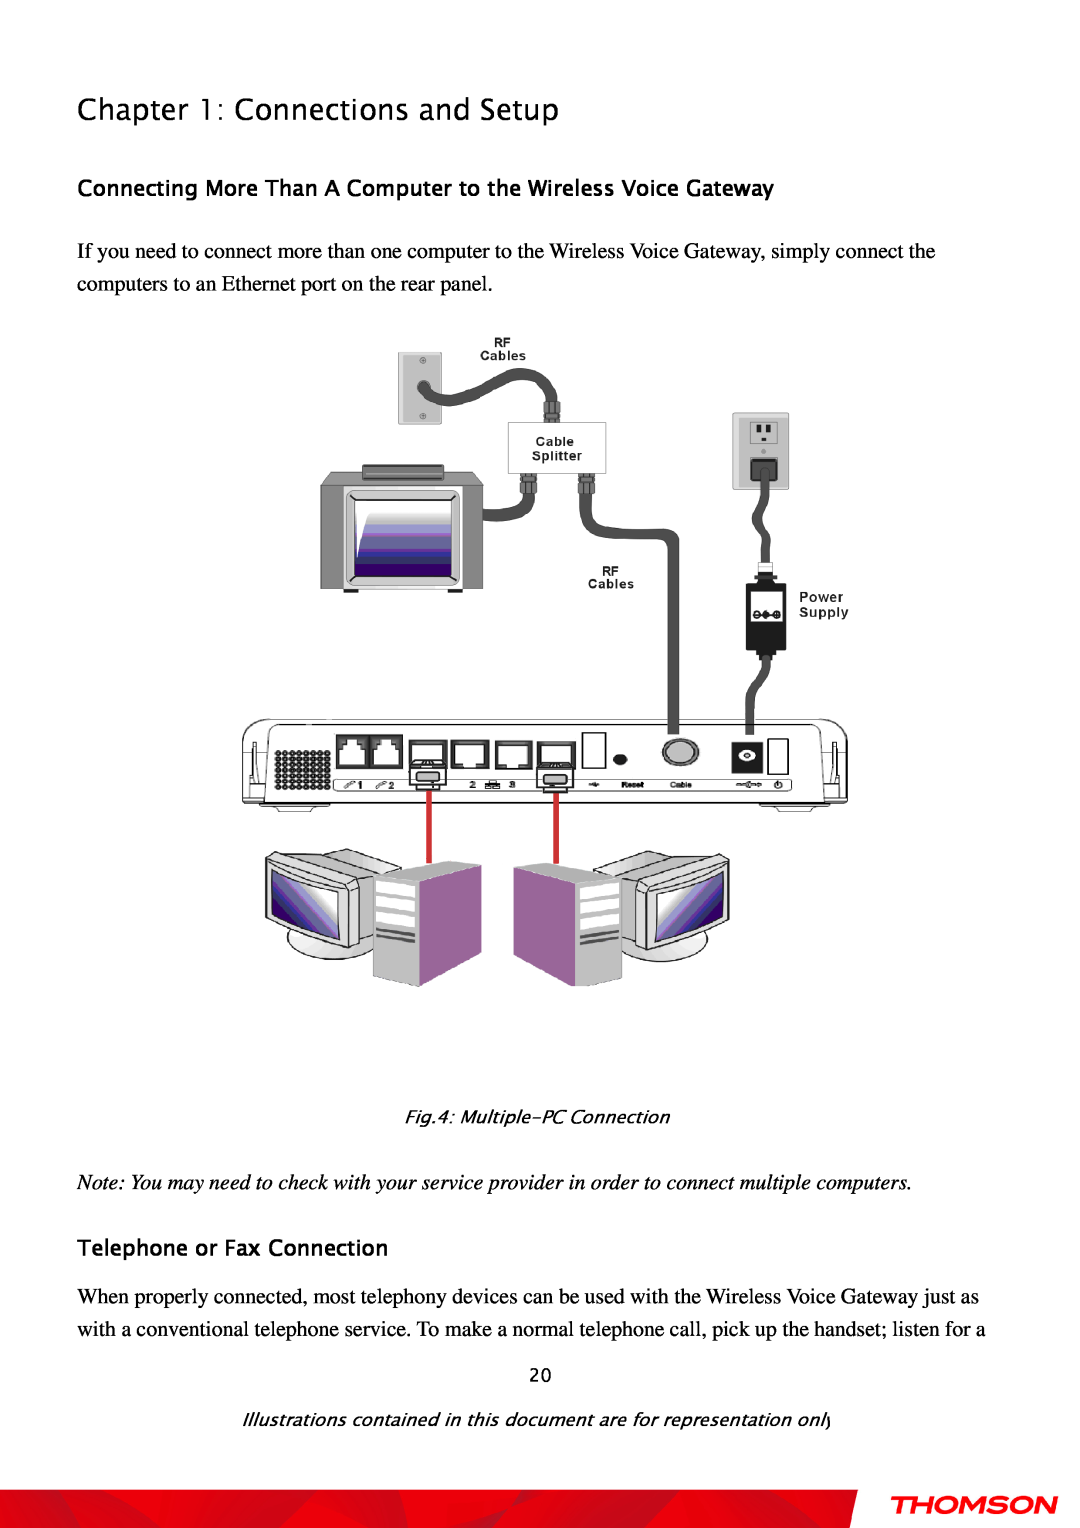 Gateway TWG870 user manual Connections and Setup, Telephone or Fax Connection, Multiple-PCConnection 